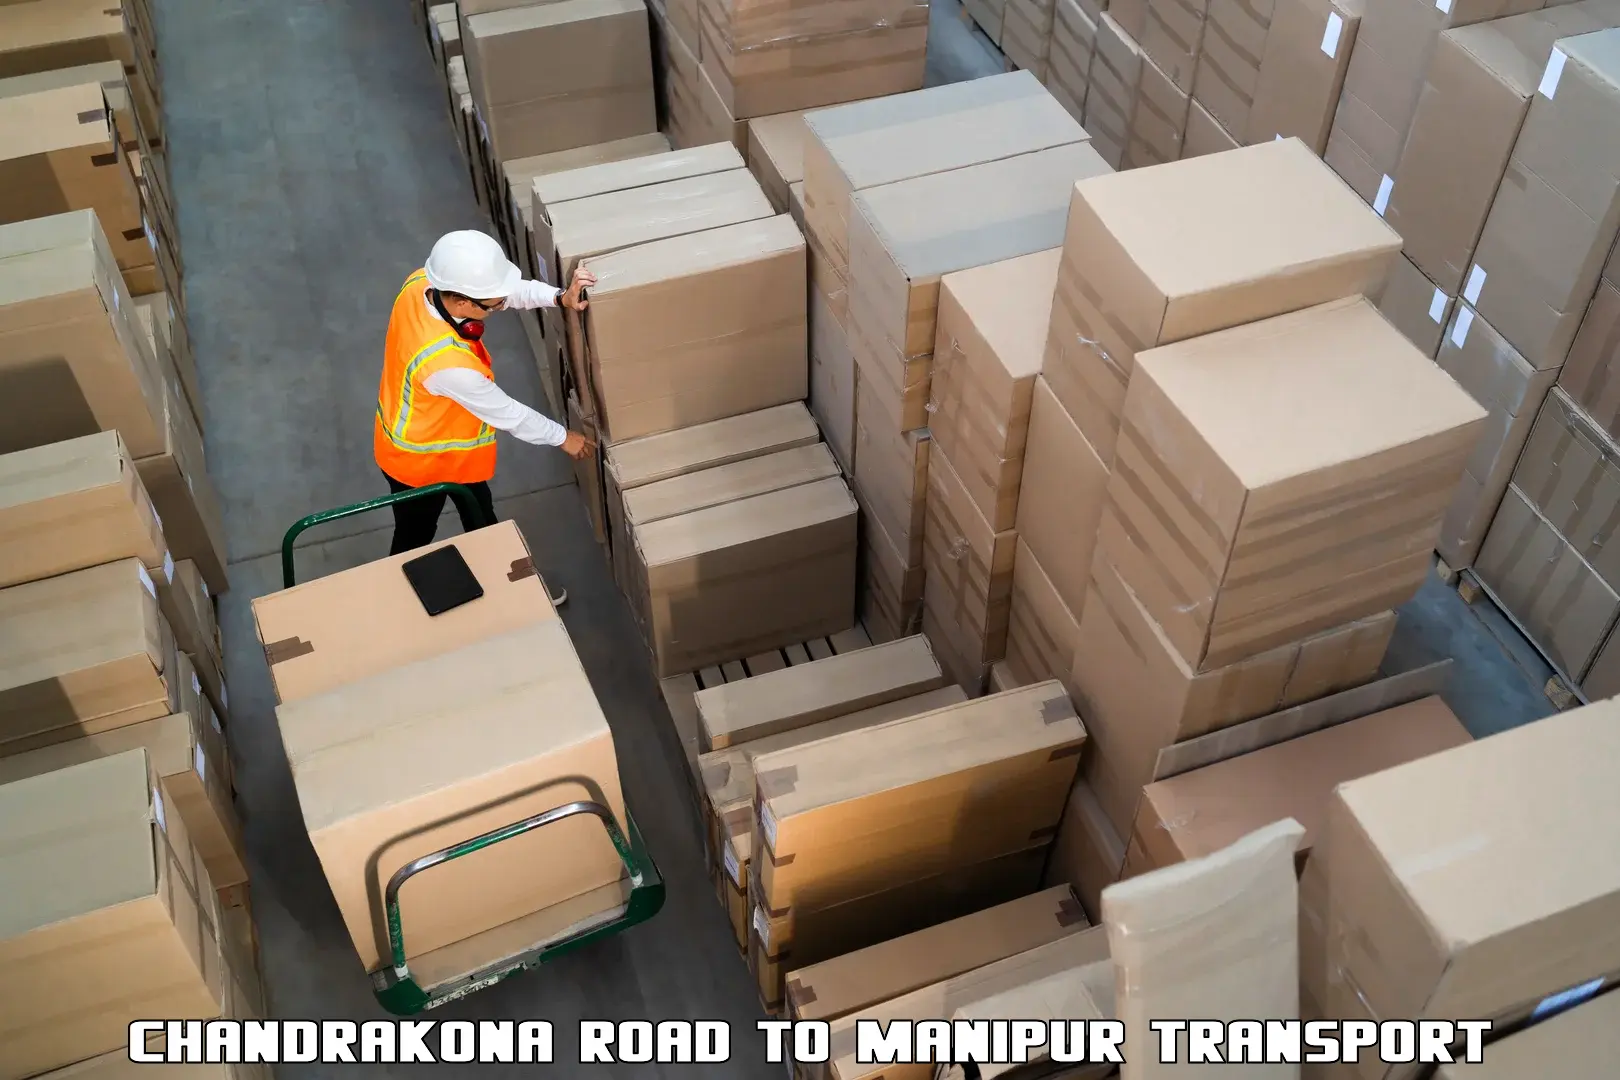 Parcel transport services Chandrakona Road to Thoubal